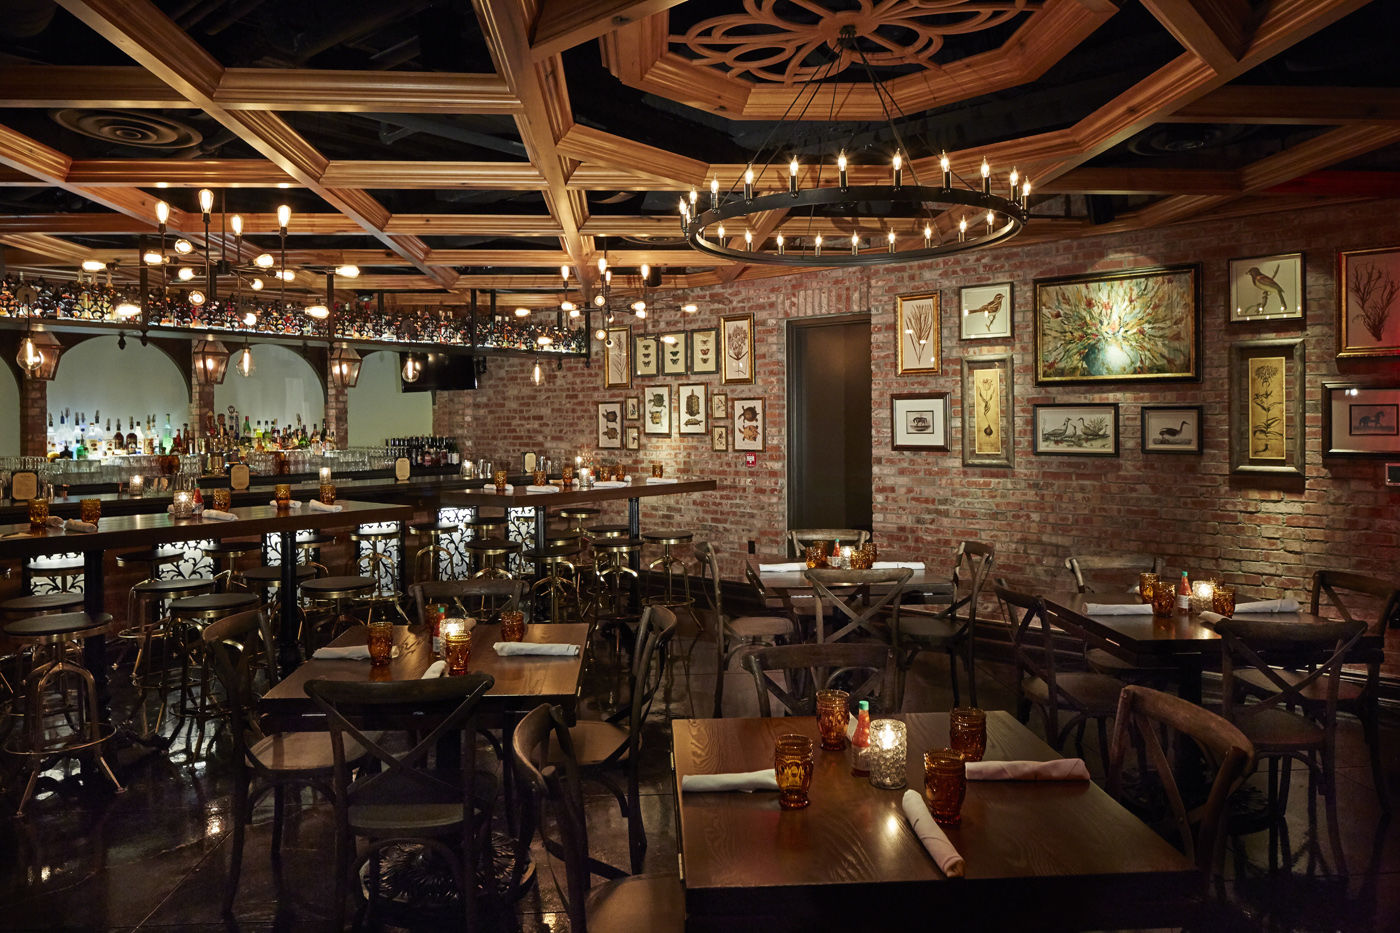 The bar at Succotash offers a button-down variation on its Southern charm. (Courtesy //3877 ; Clarence Butts)